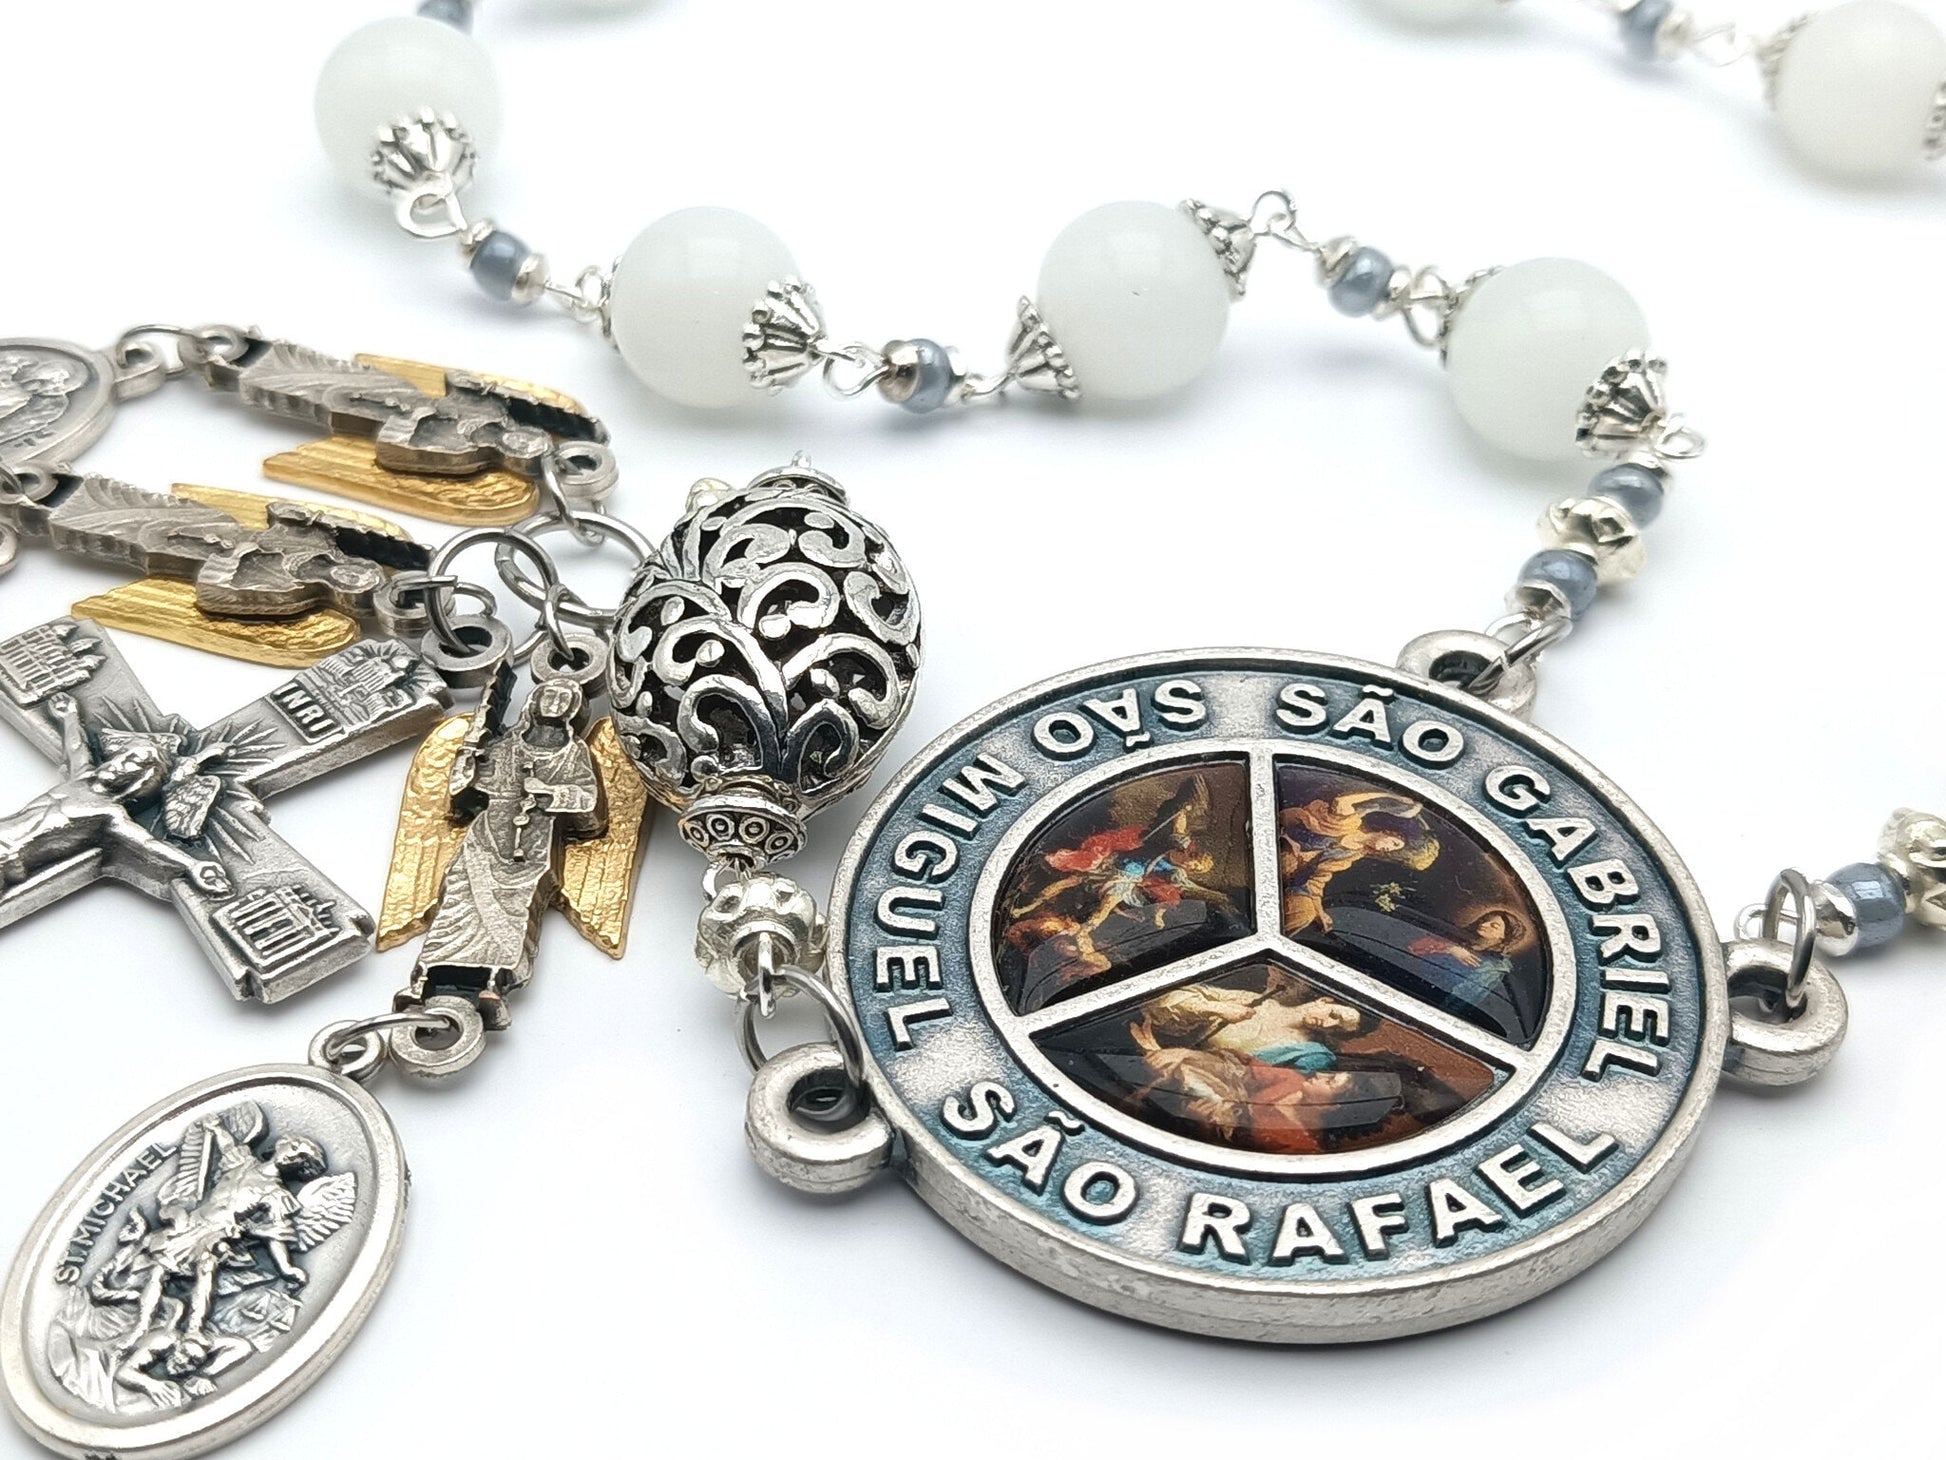 Archangels unique rosary beads single decade or tenner with opal gemstone beads, silver basilica crucifix, picture centre medal and archangels medals.